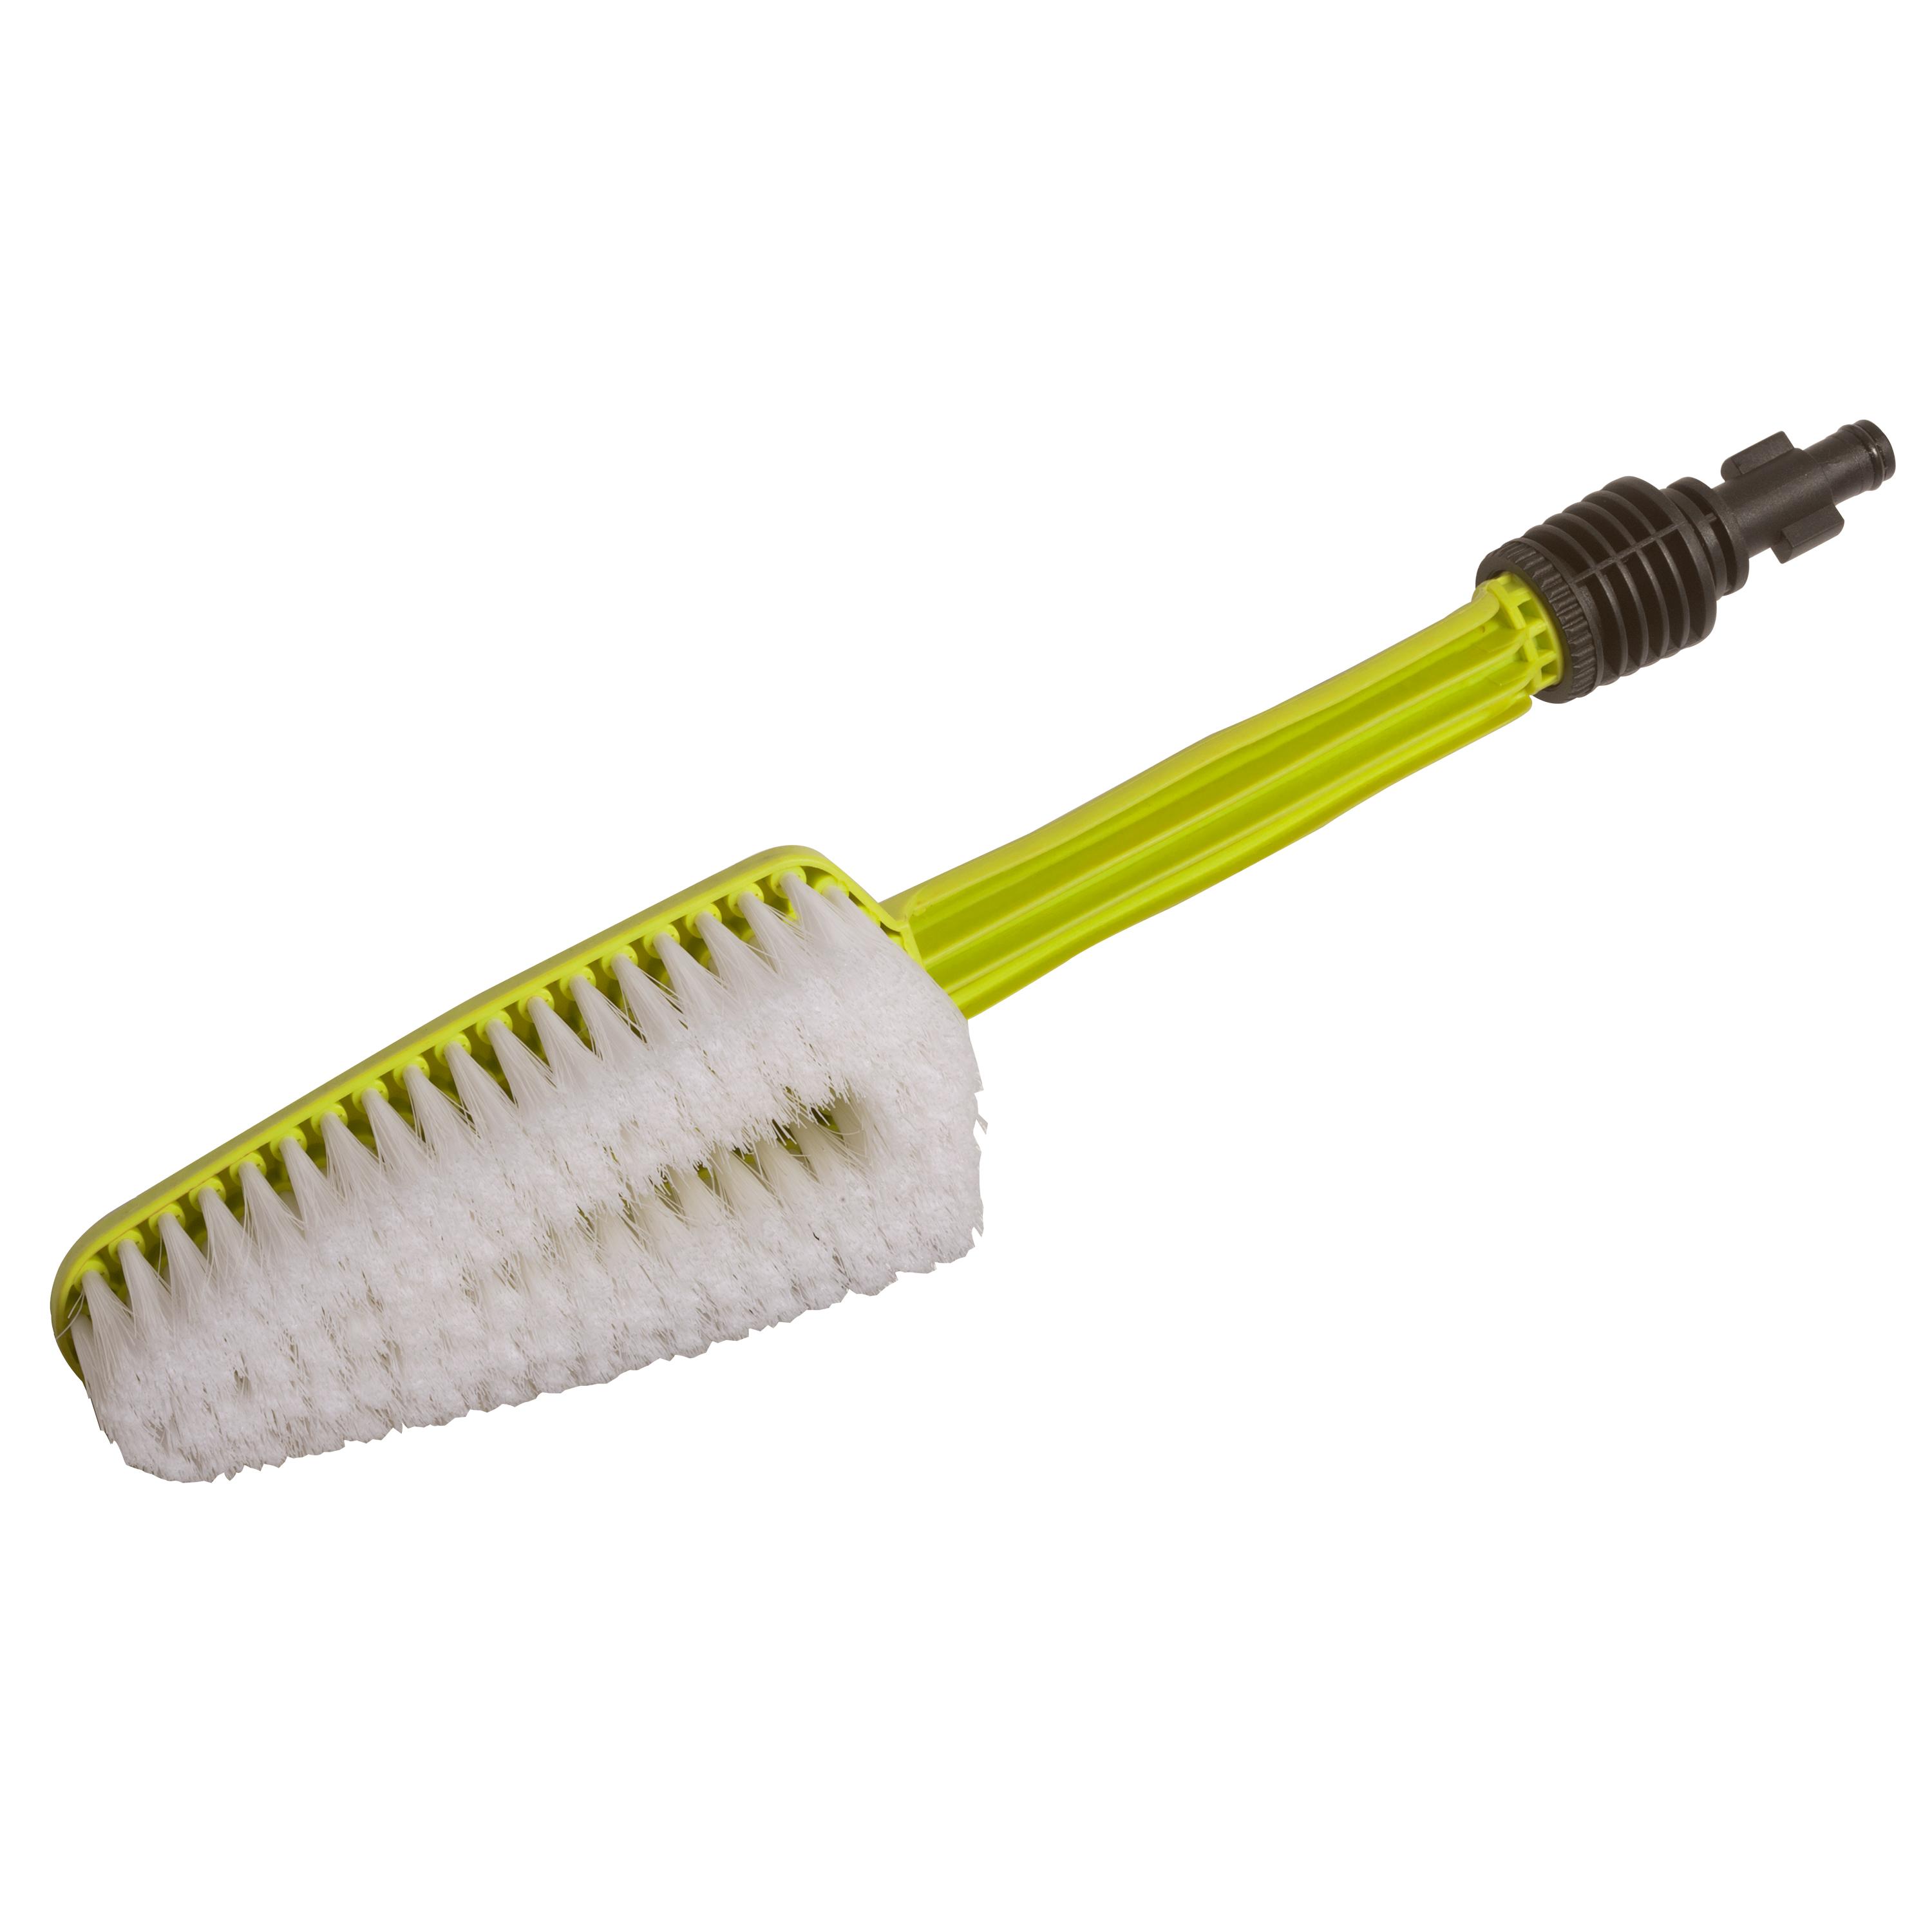 SPX-WB1 Universal Pressure Washer Wheel and Rim Brush for SP